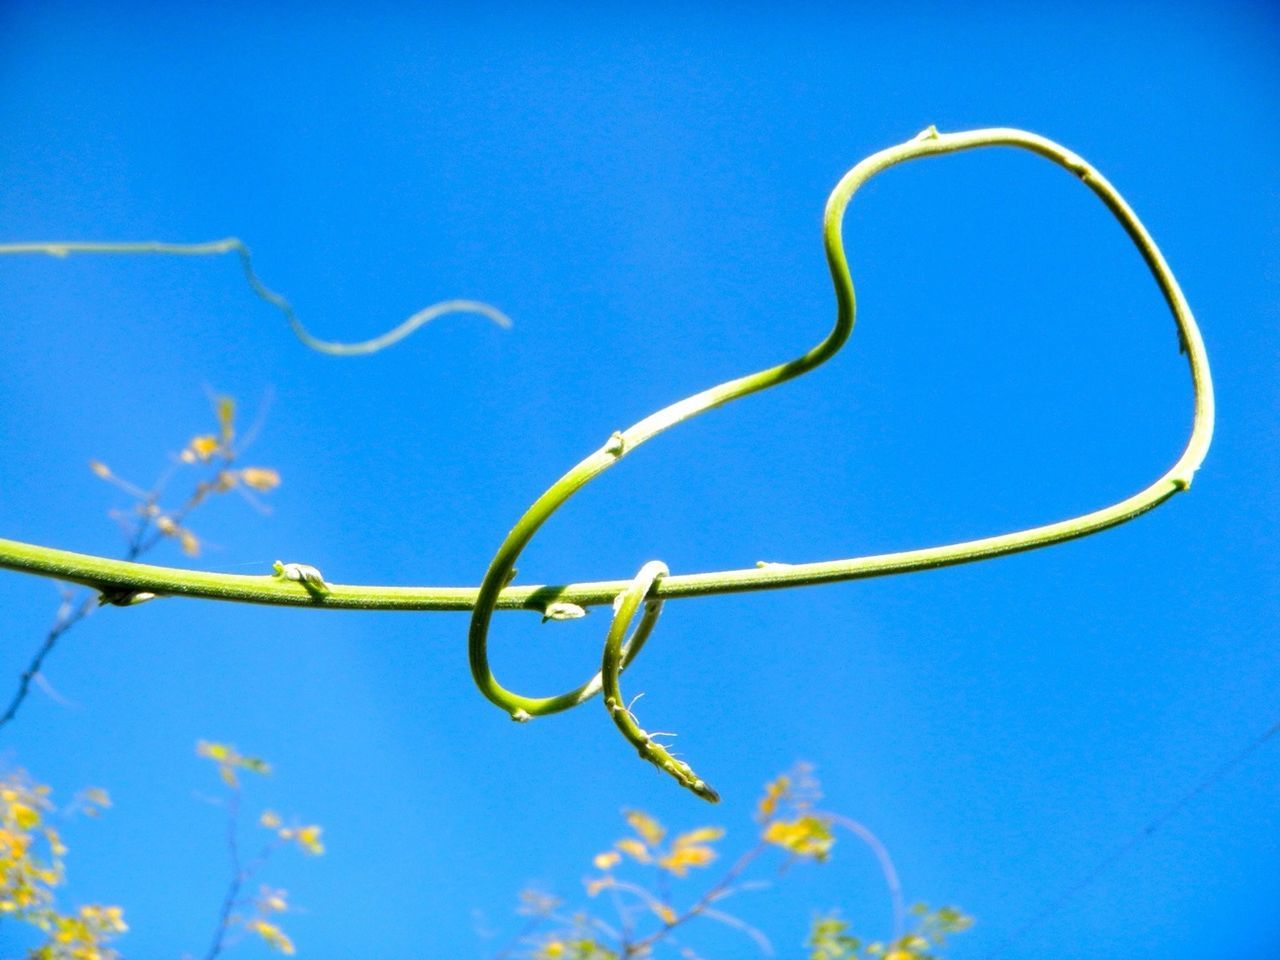 Bent green plant against sky